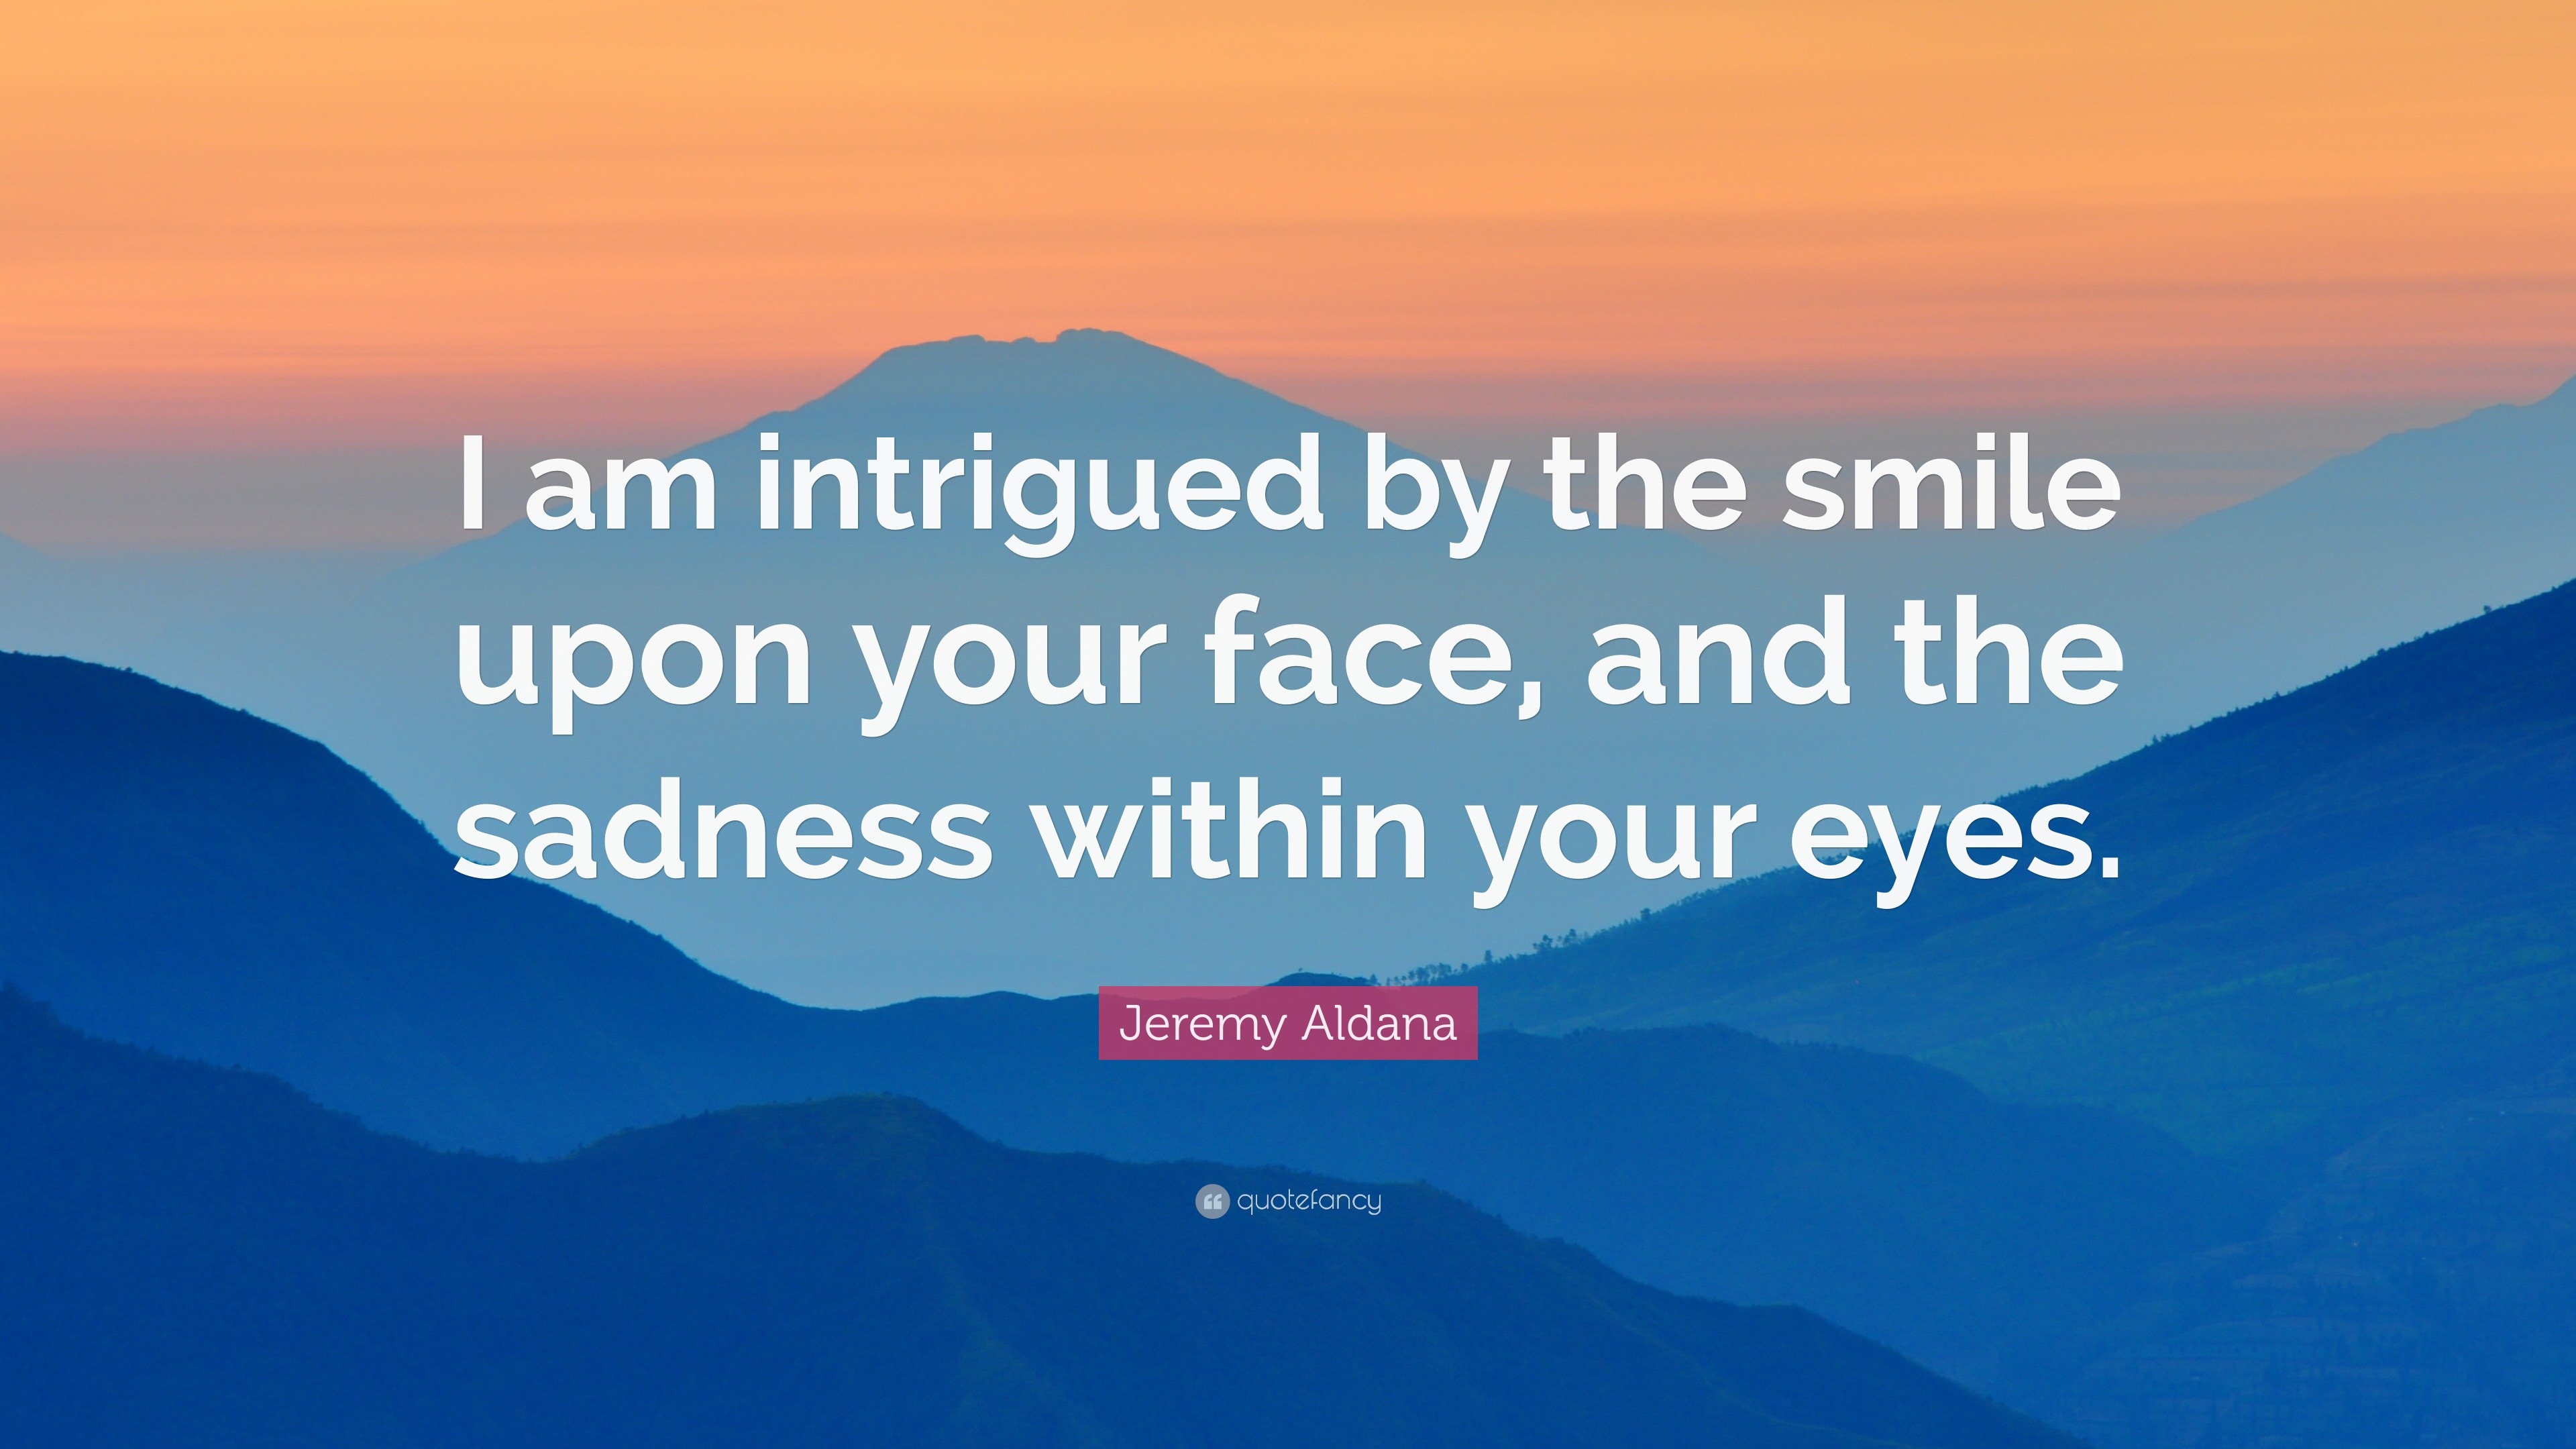 Jeremy Aldana Quote: “I am intrigued by the smile upon your face, and ...